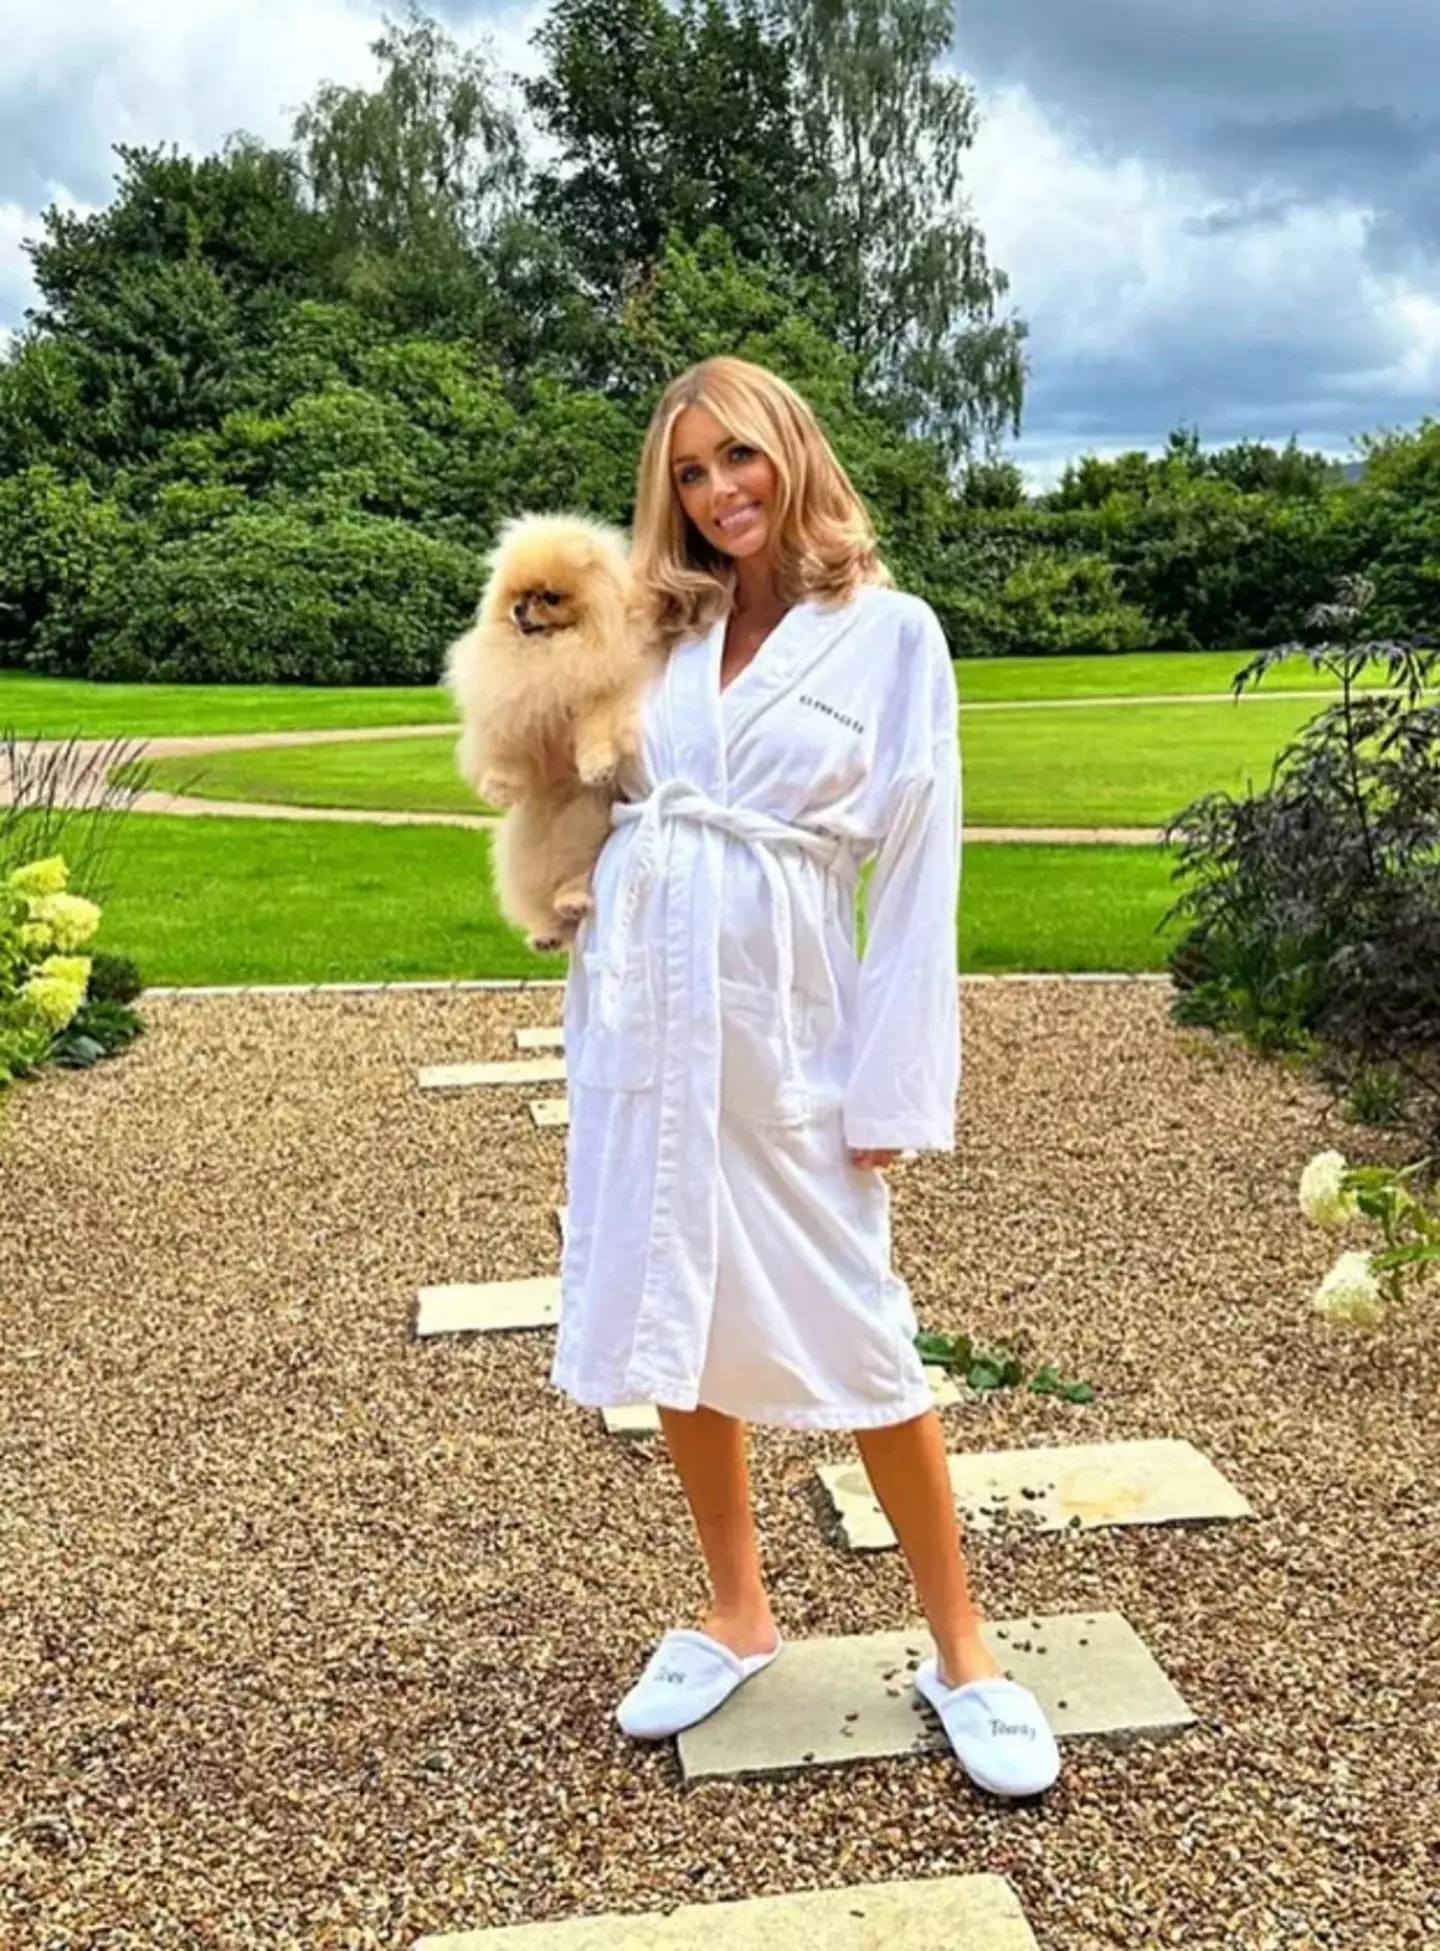 Laura posted a photo at the country estate on Monday, 21 August.